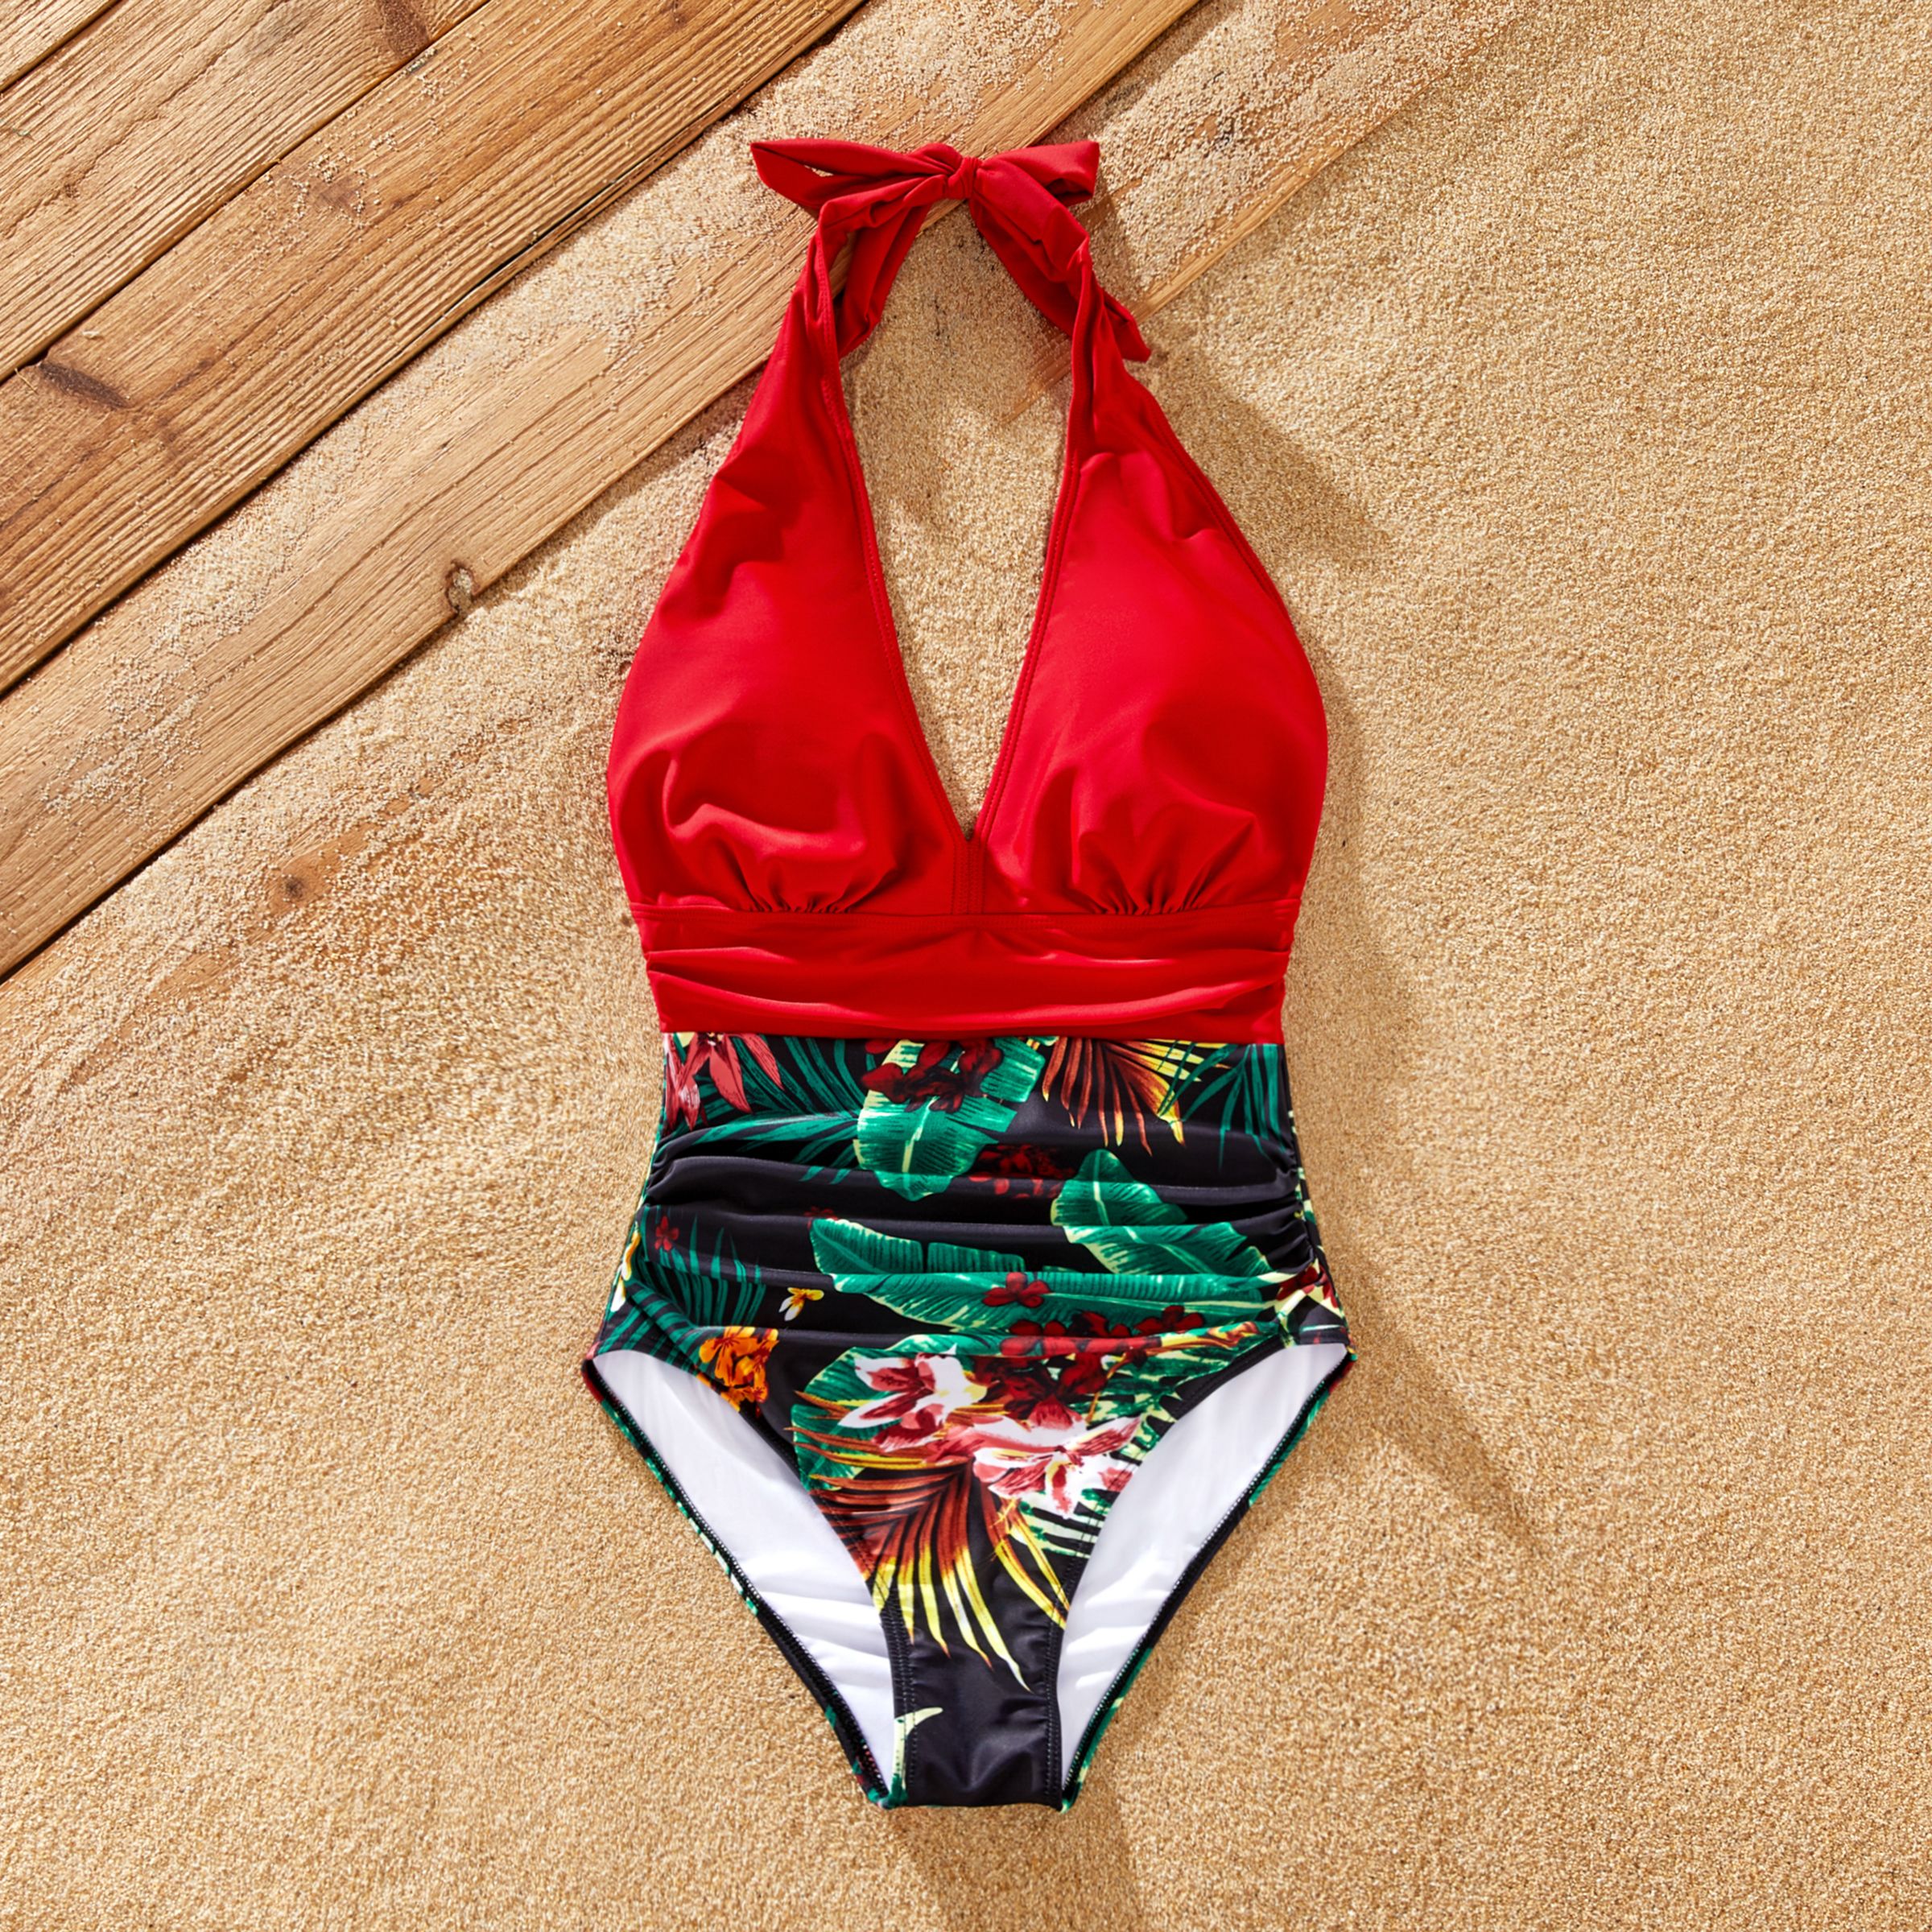 Family Matching Floral Drawstring Swim Trunks Or Red Halter Top Spliced Swimsuit